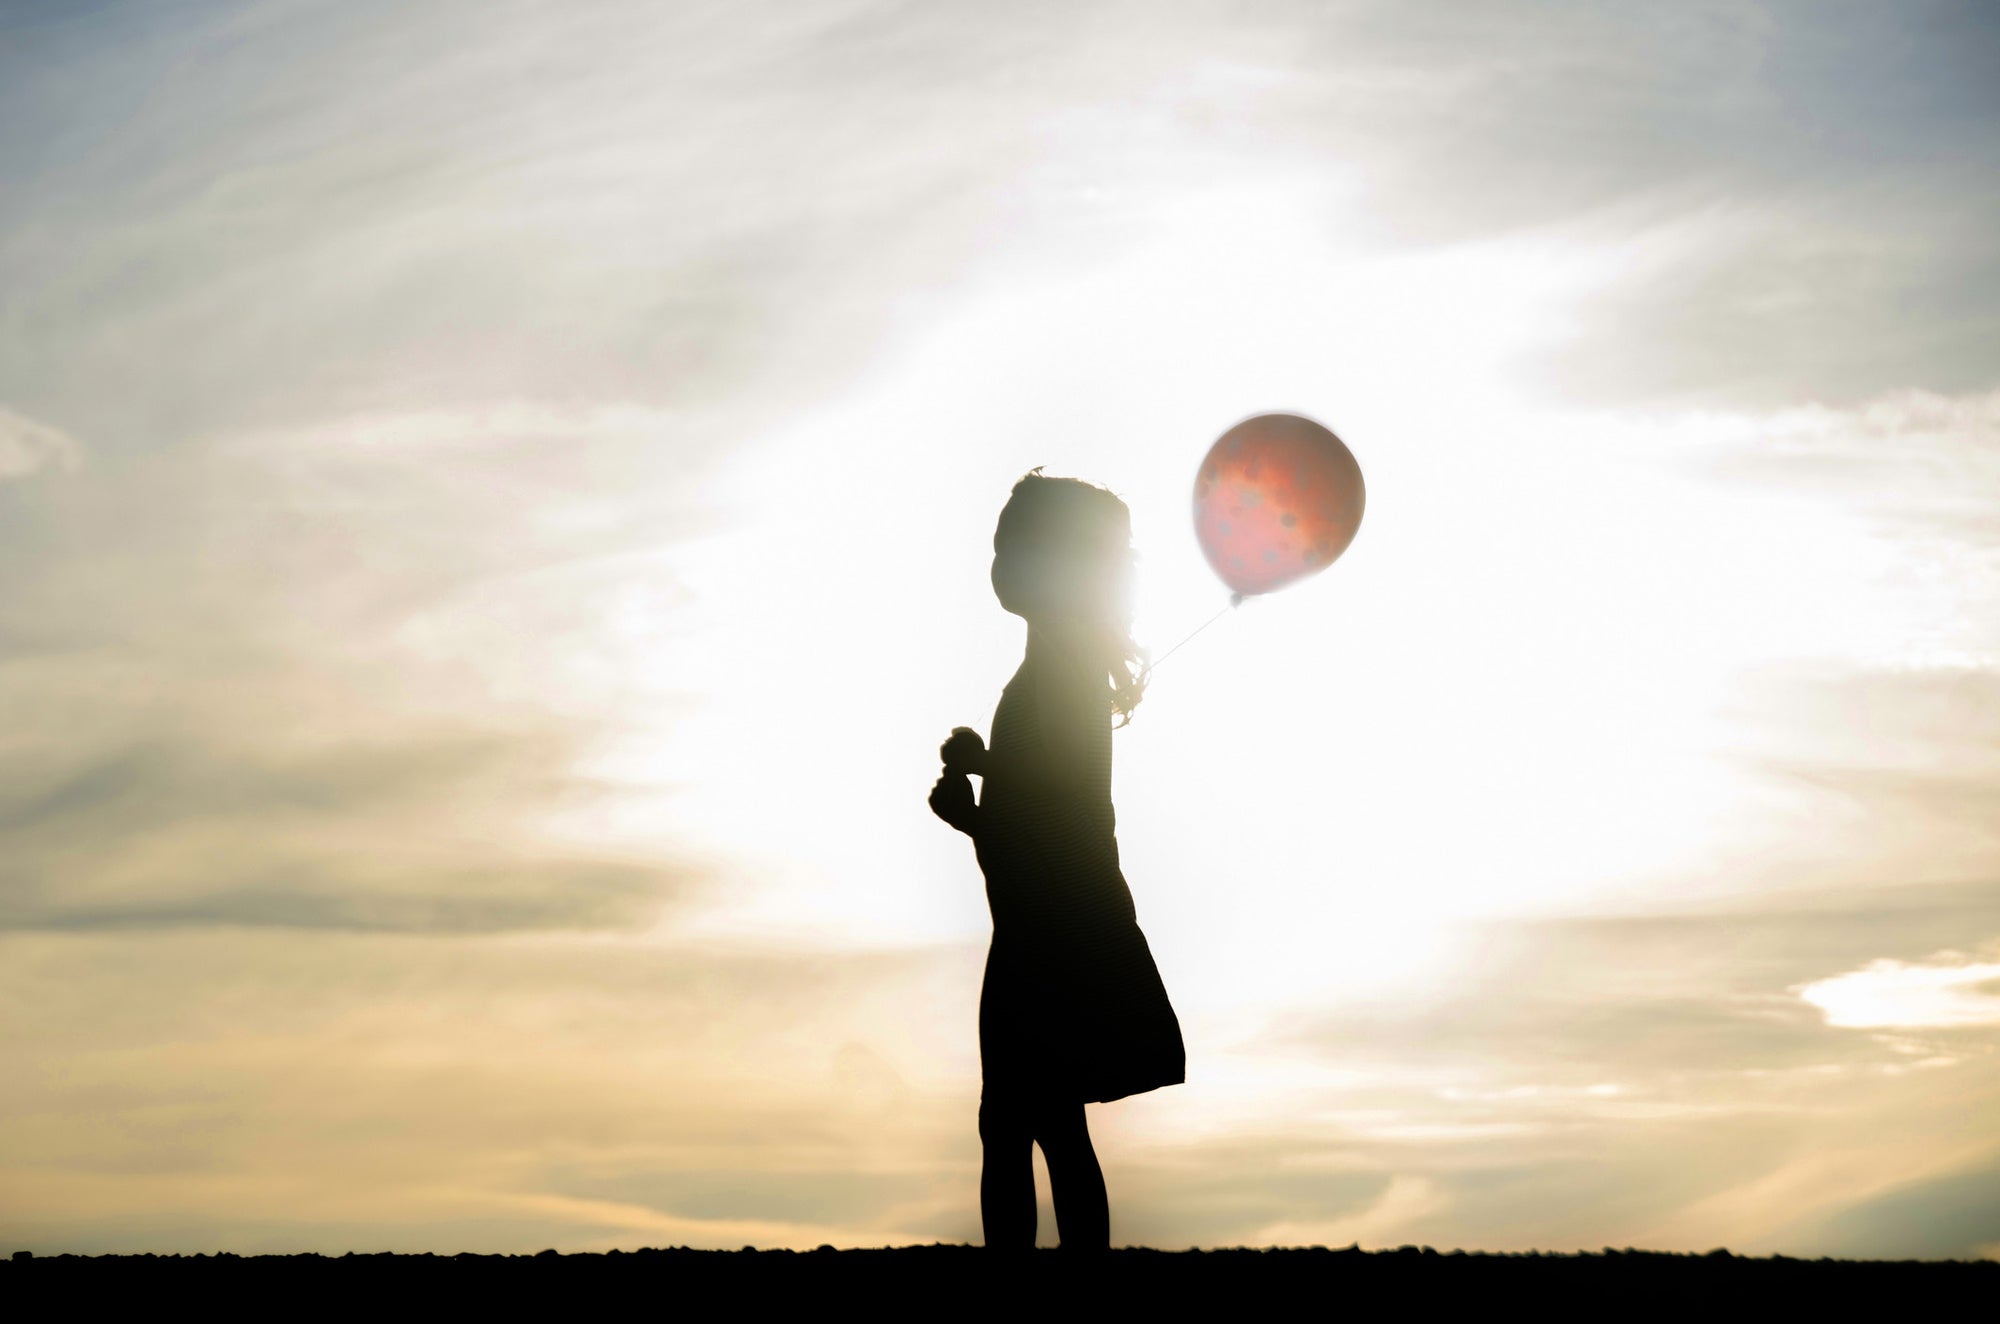 A girl is playing outside in a sunshine with ballon